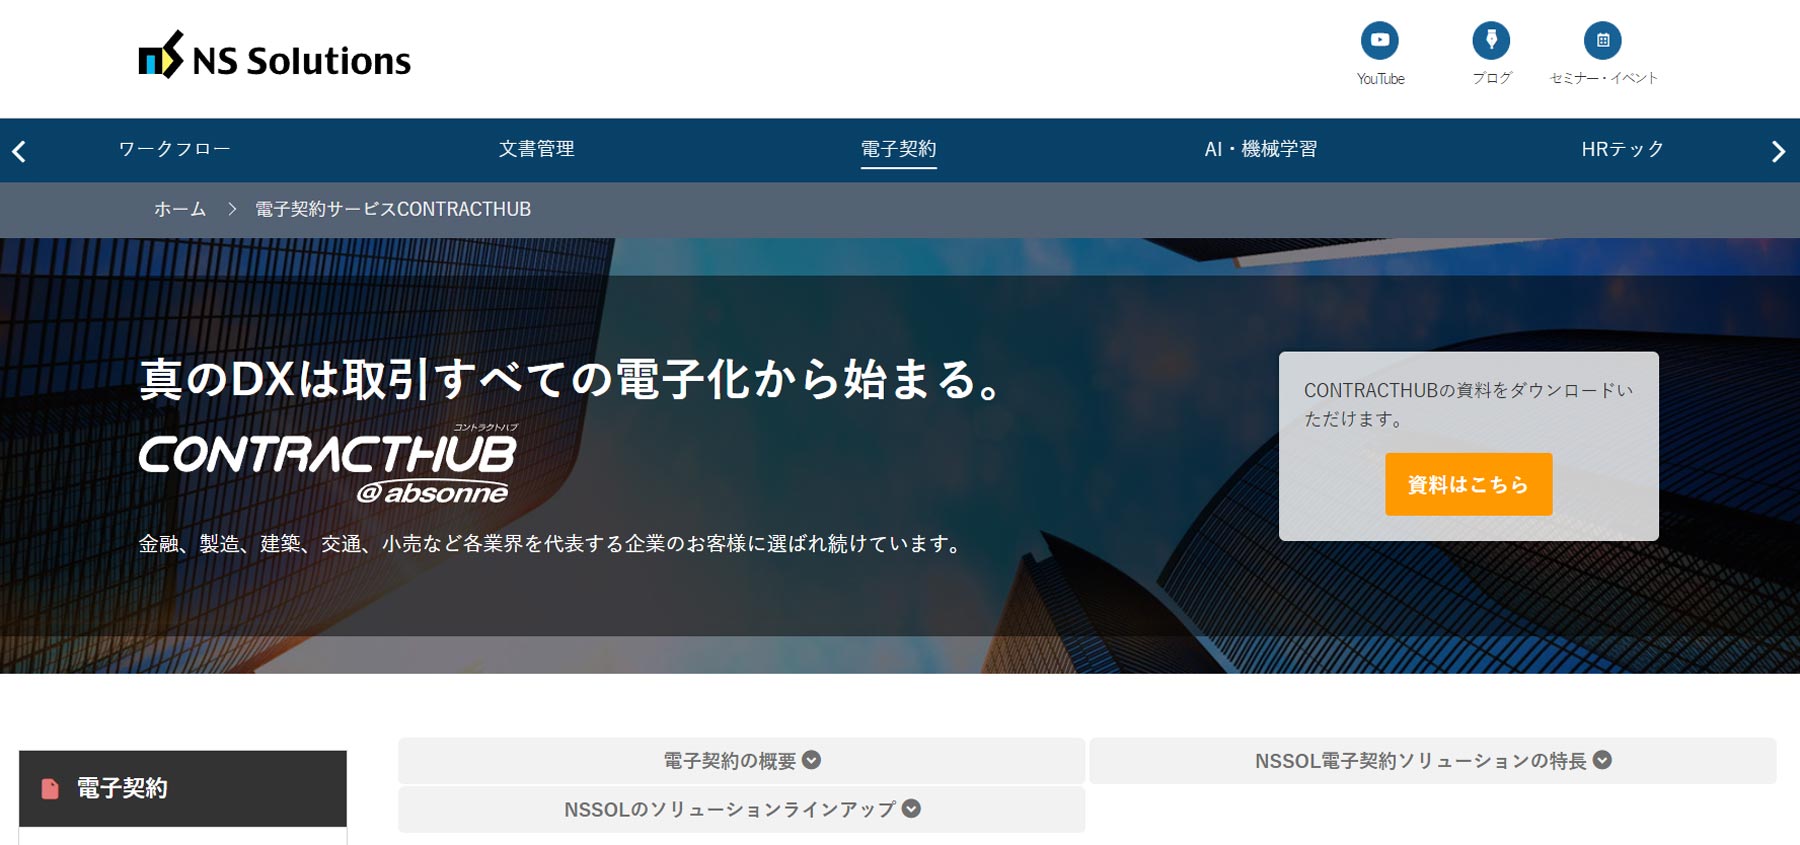 CONTRACTHUB@absonne 公式Webサイト